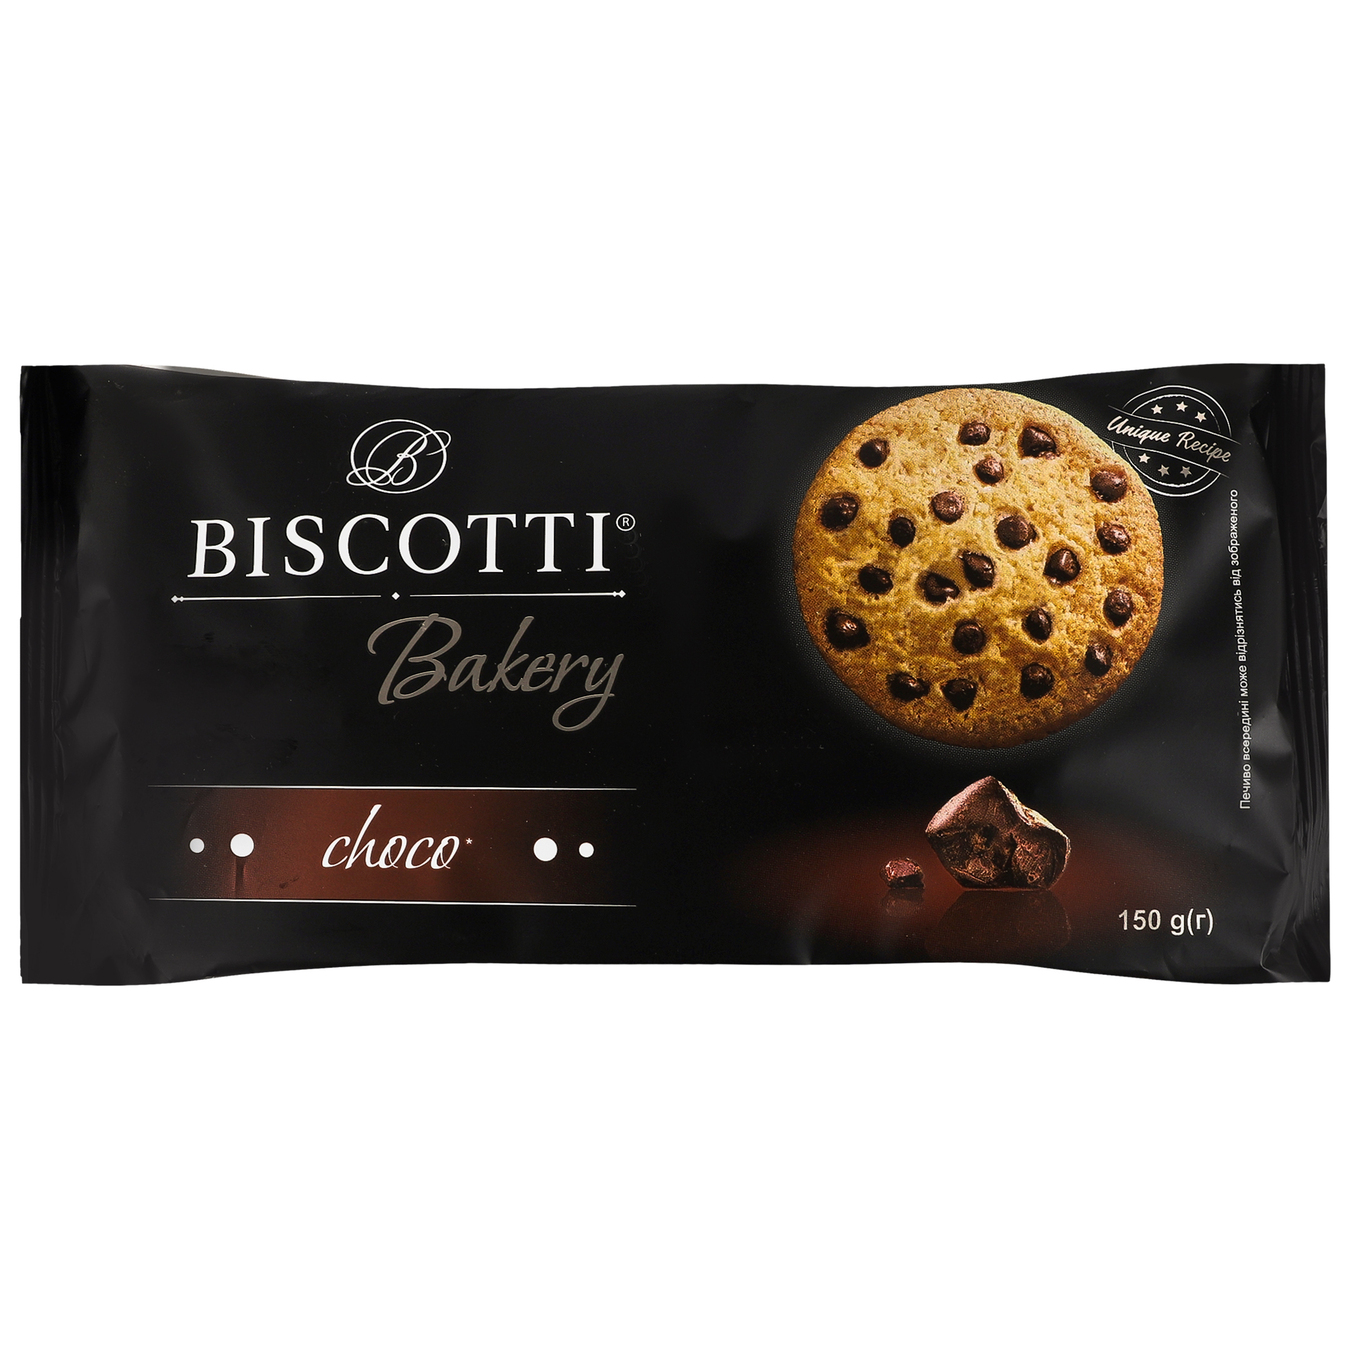 BISCOTTI cookies Bakery cookies with pieces of BISCOTTI glaze 150g